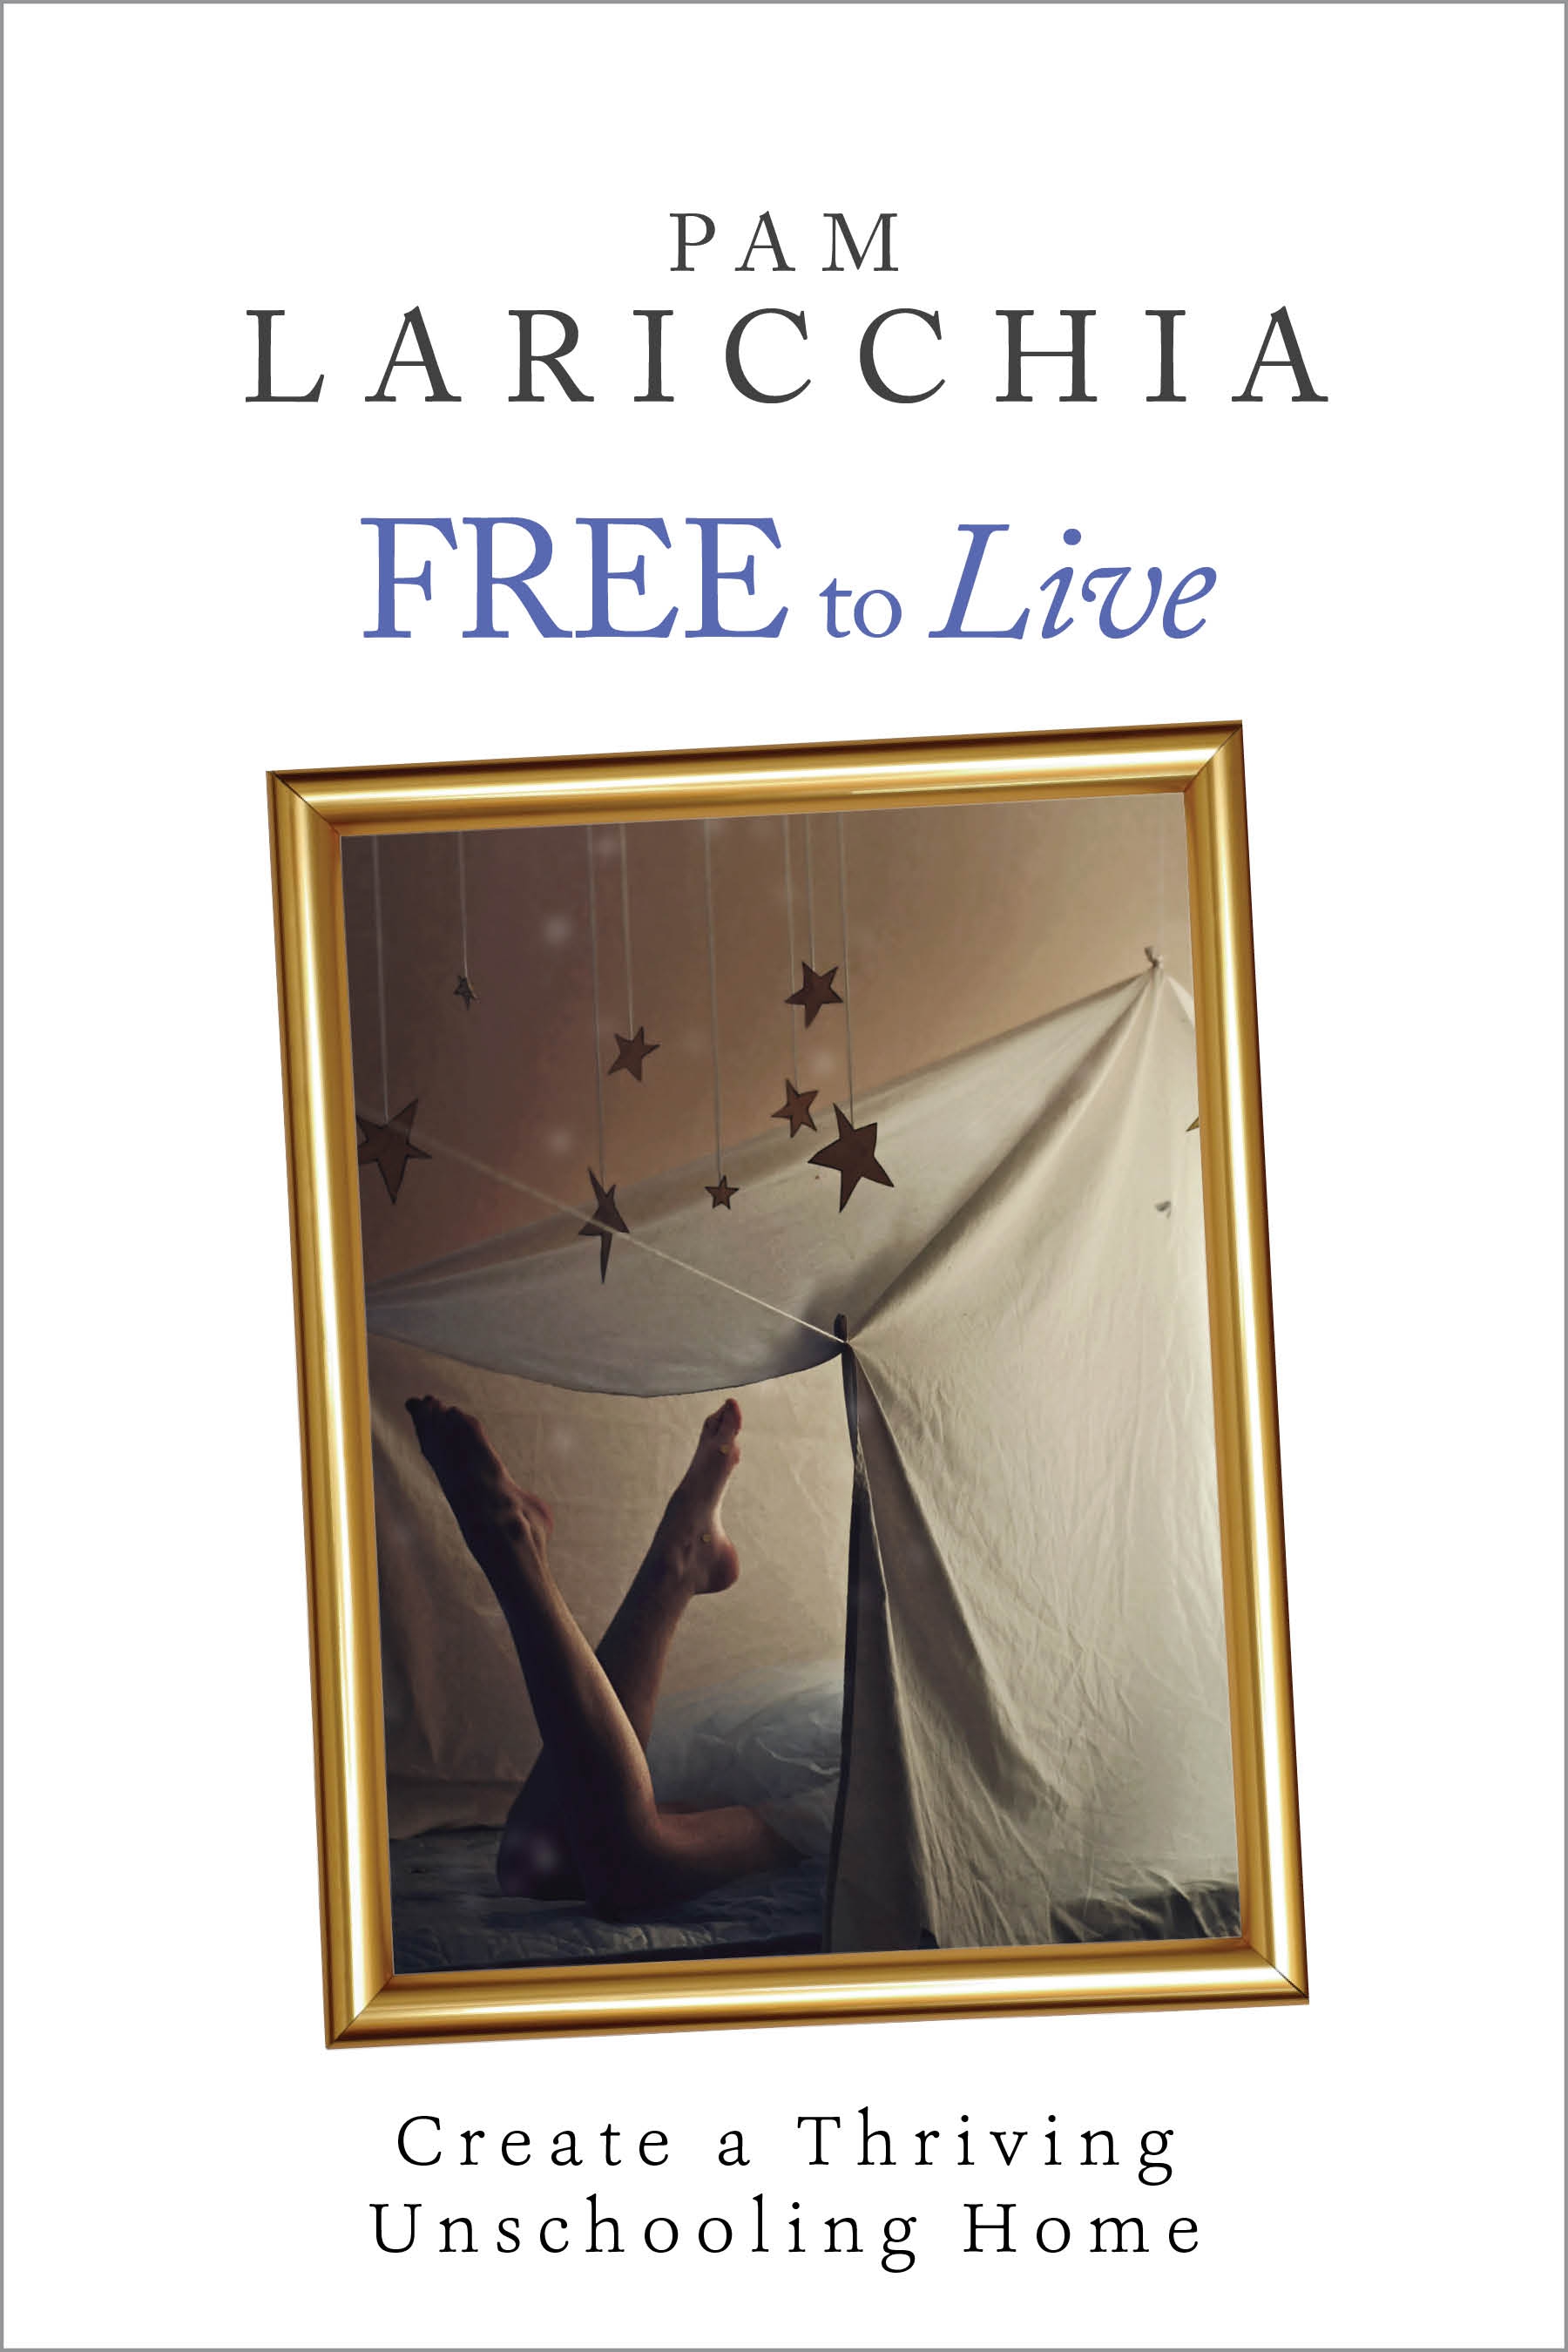 Contents Free to Live Create a Thriving Unschooling Home PAM LARICCHIA - photo 1